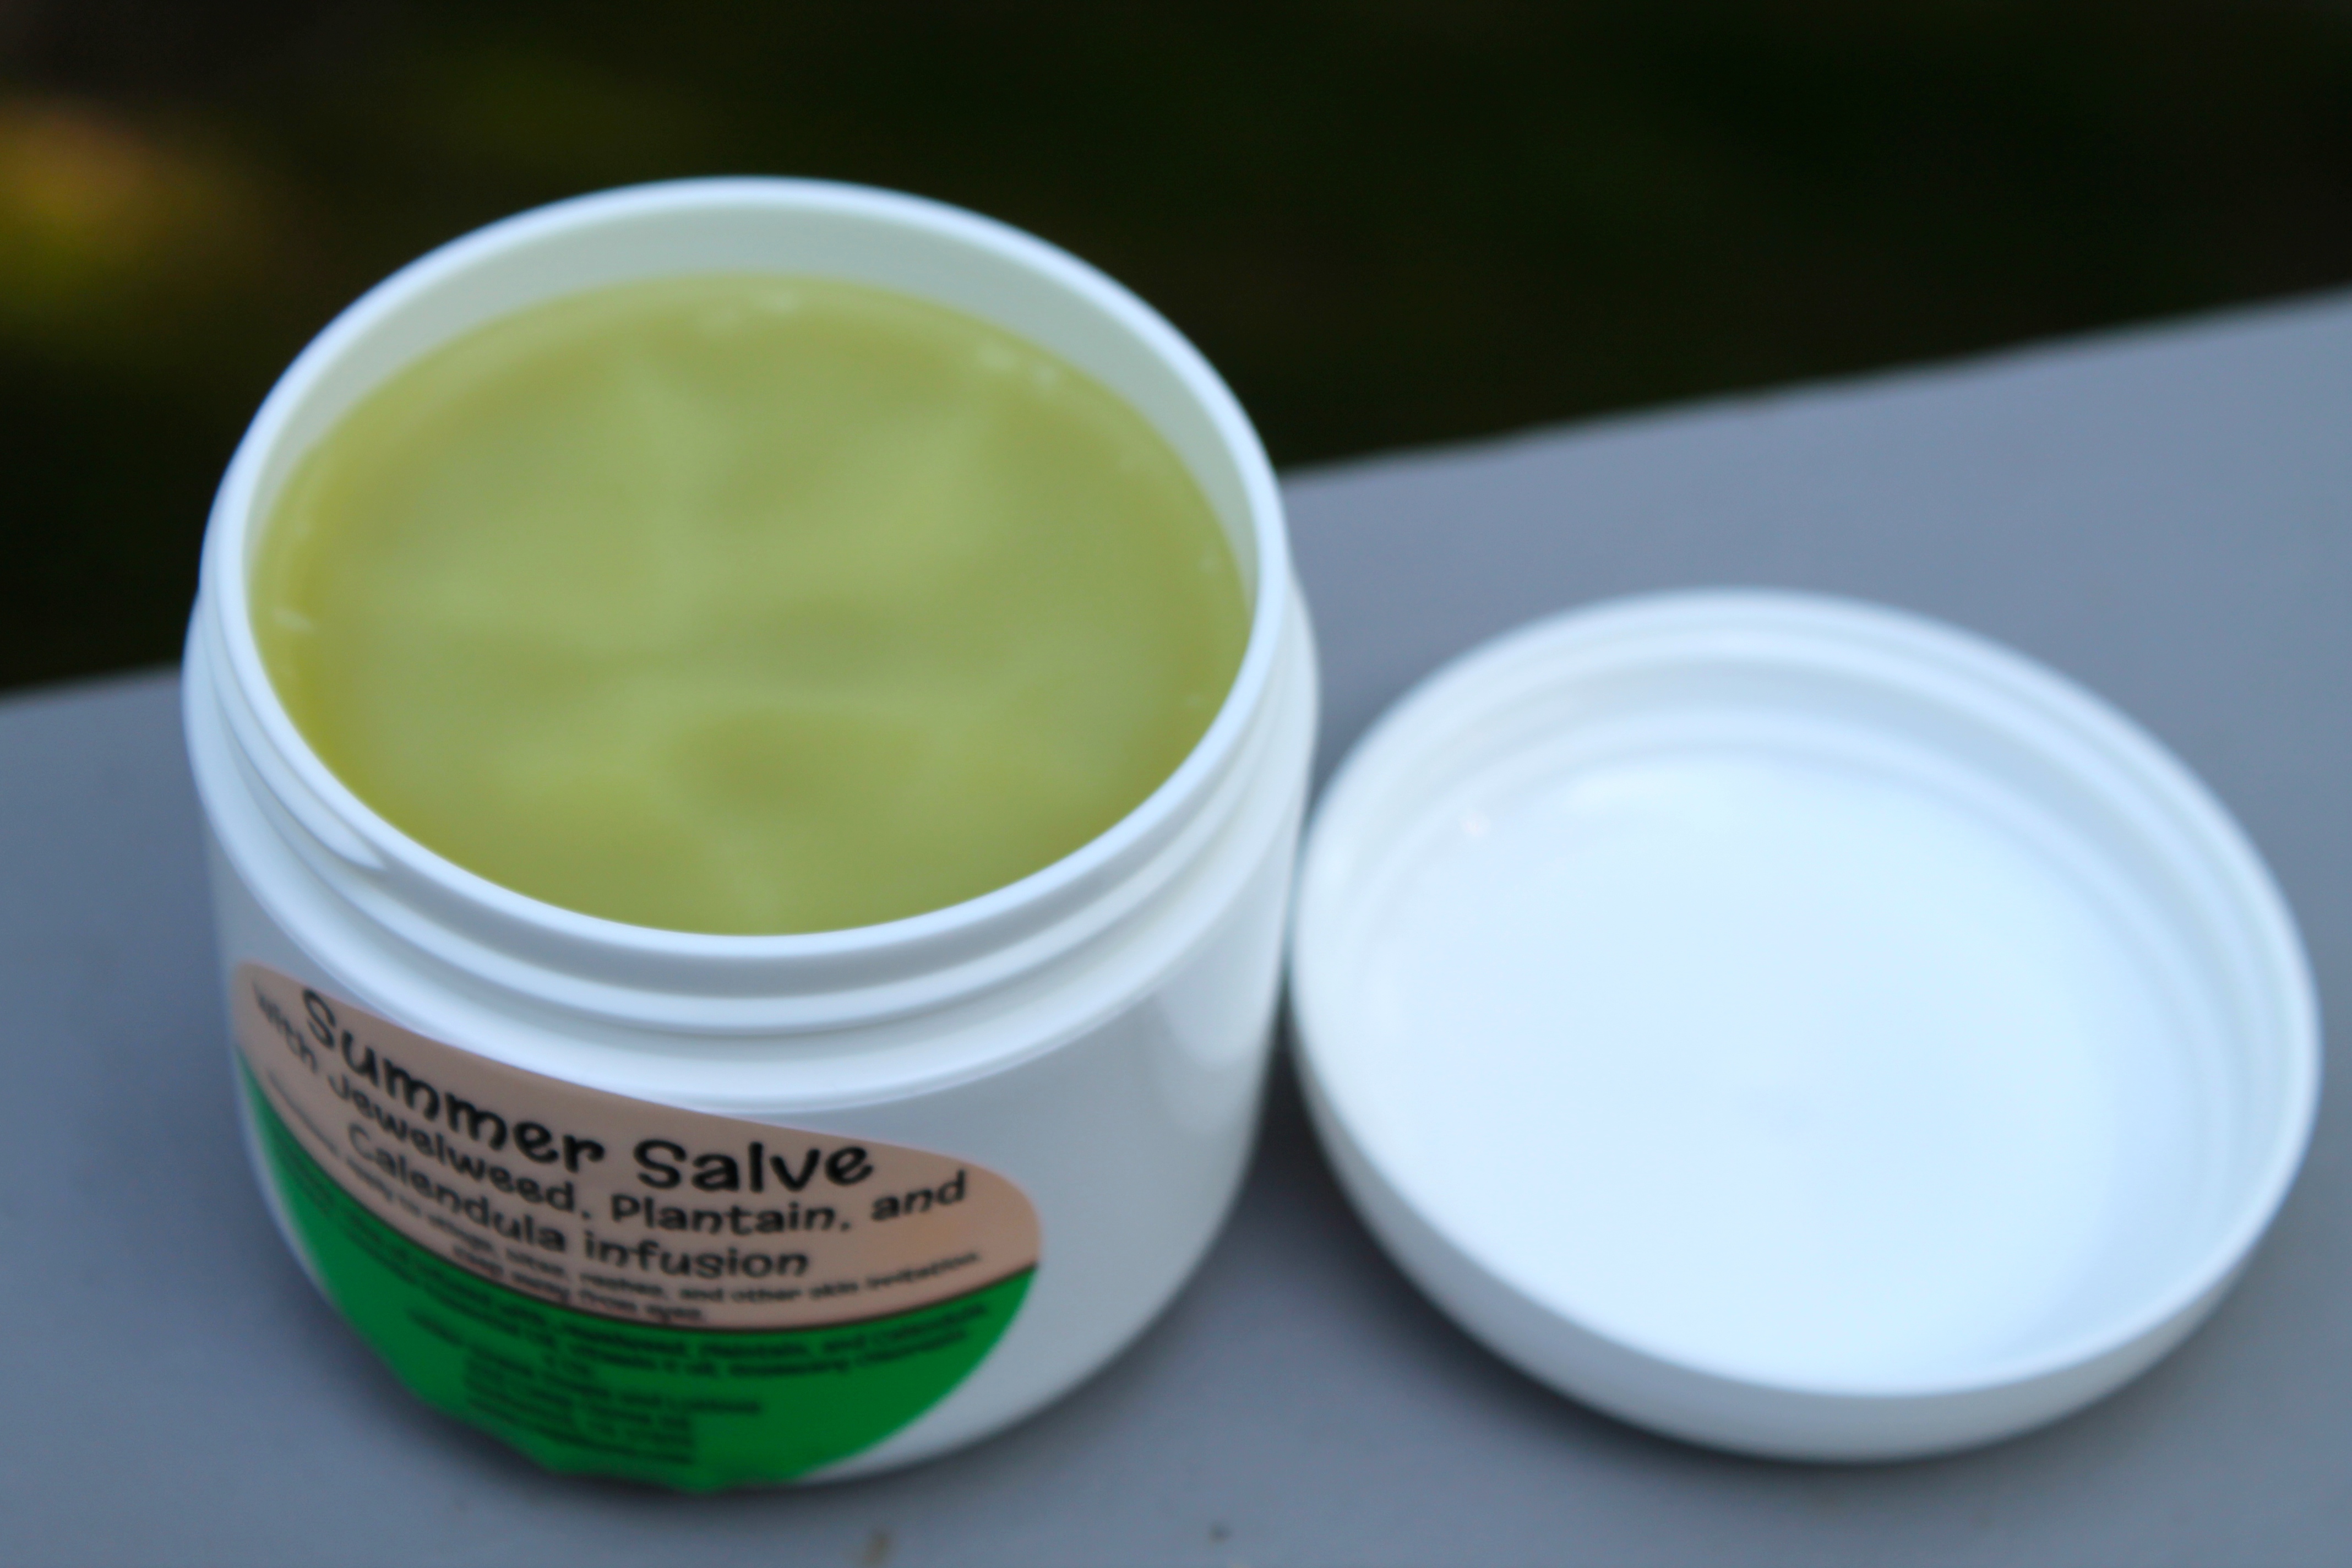 summer salve with jewelweed, plantain, and calendula